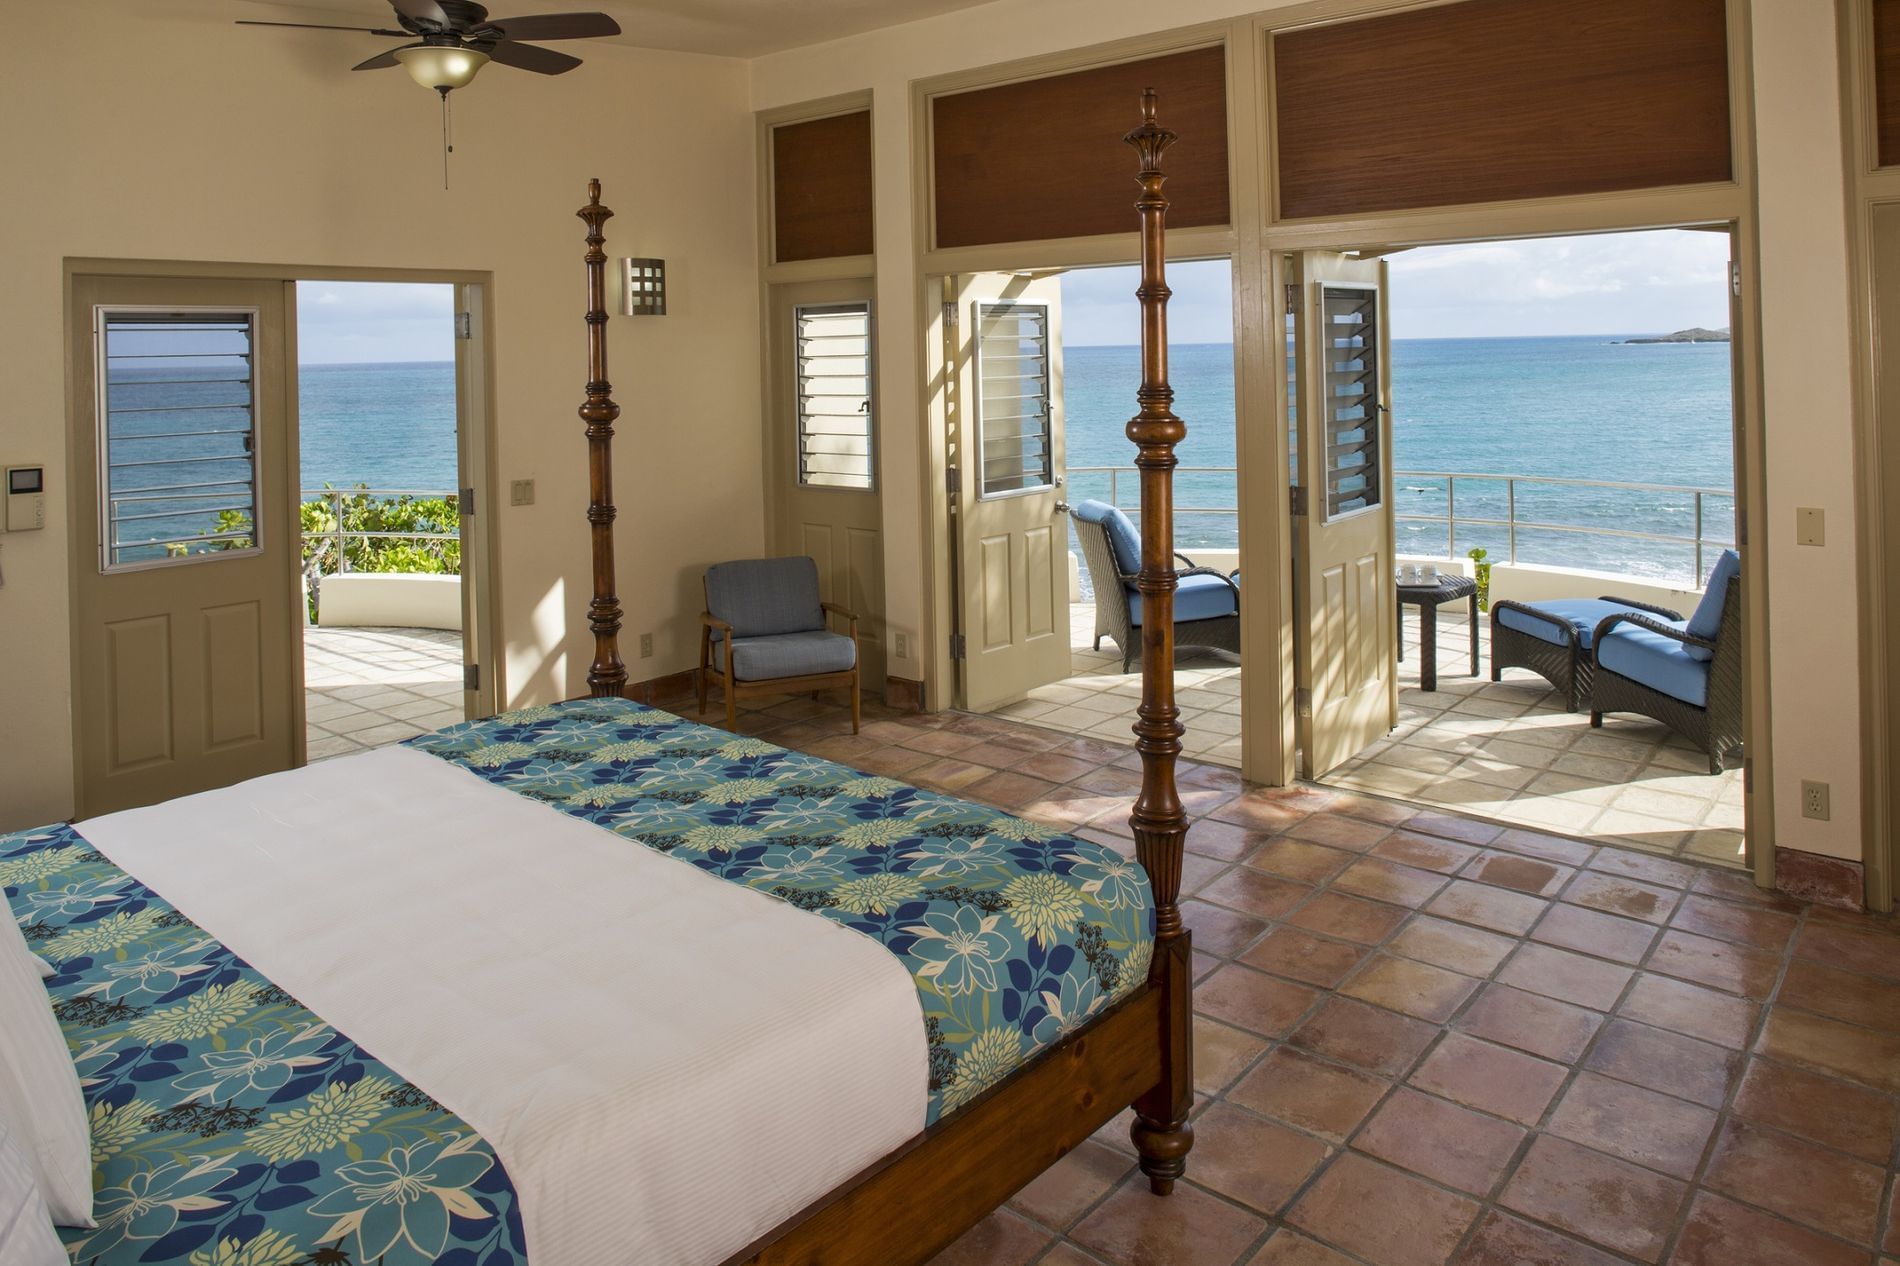 Suite with balcony lounge area & sea view at The Buccaneer Resort St. Croix